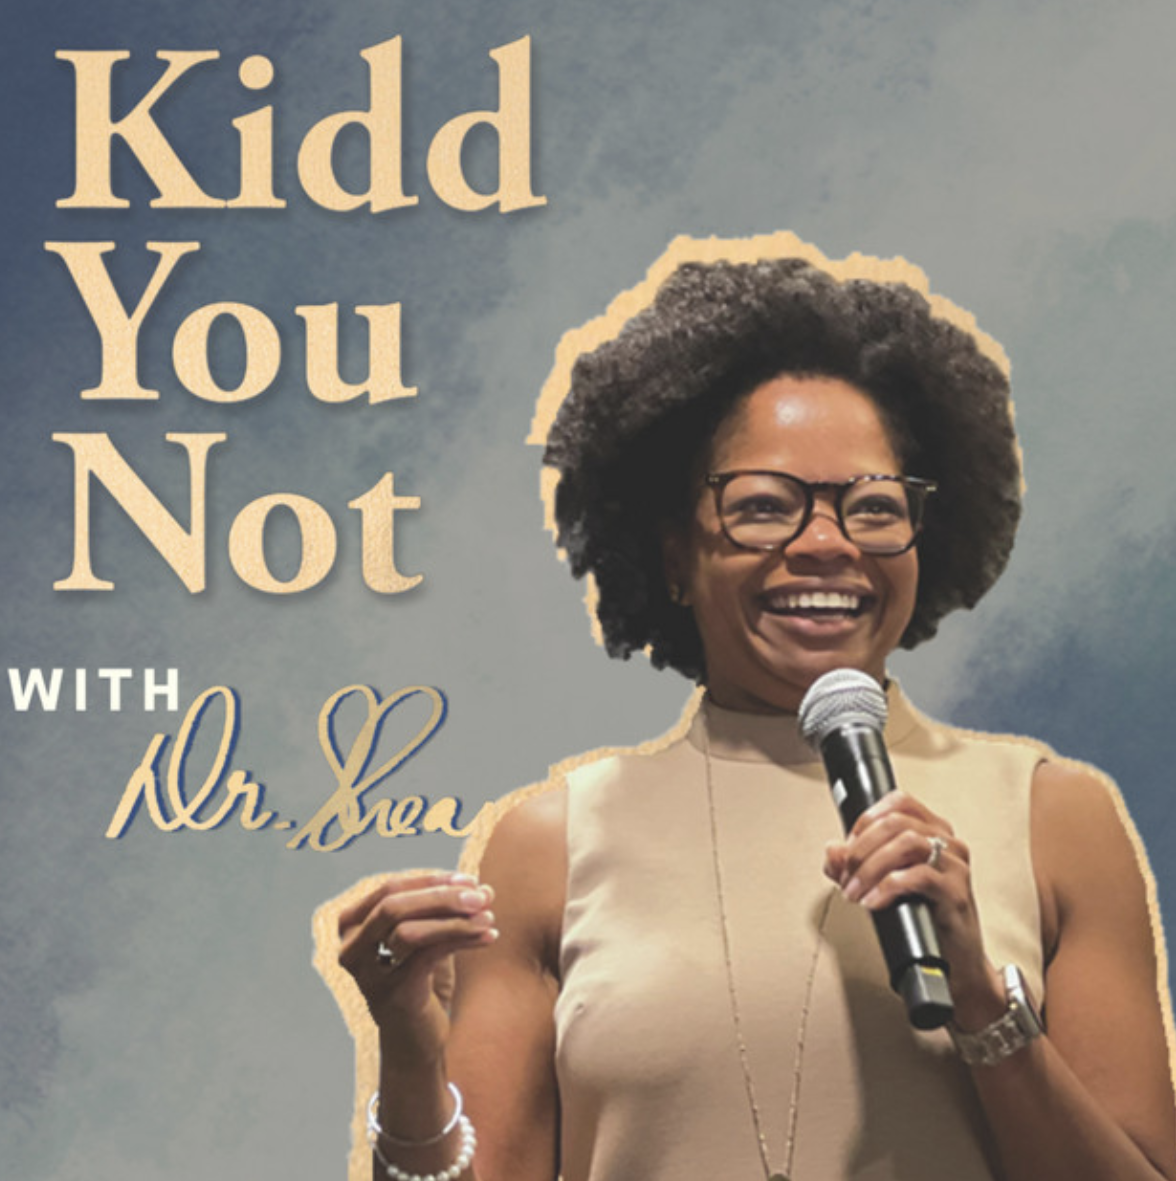 “Kidd You Not” aims to bring guests about whom students might not know much, or perhaps those we perceive to be different from us. (Courtesy of Spotify)